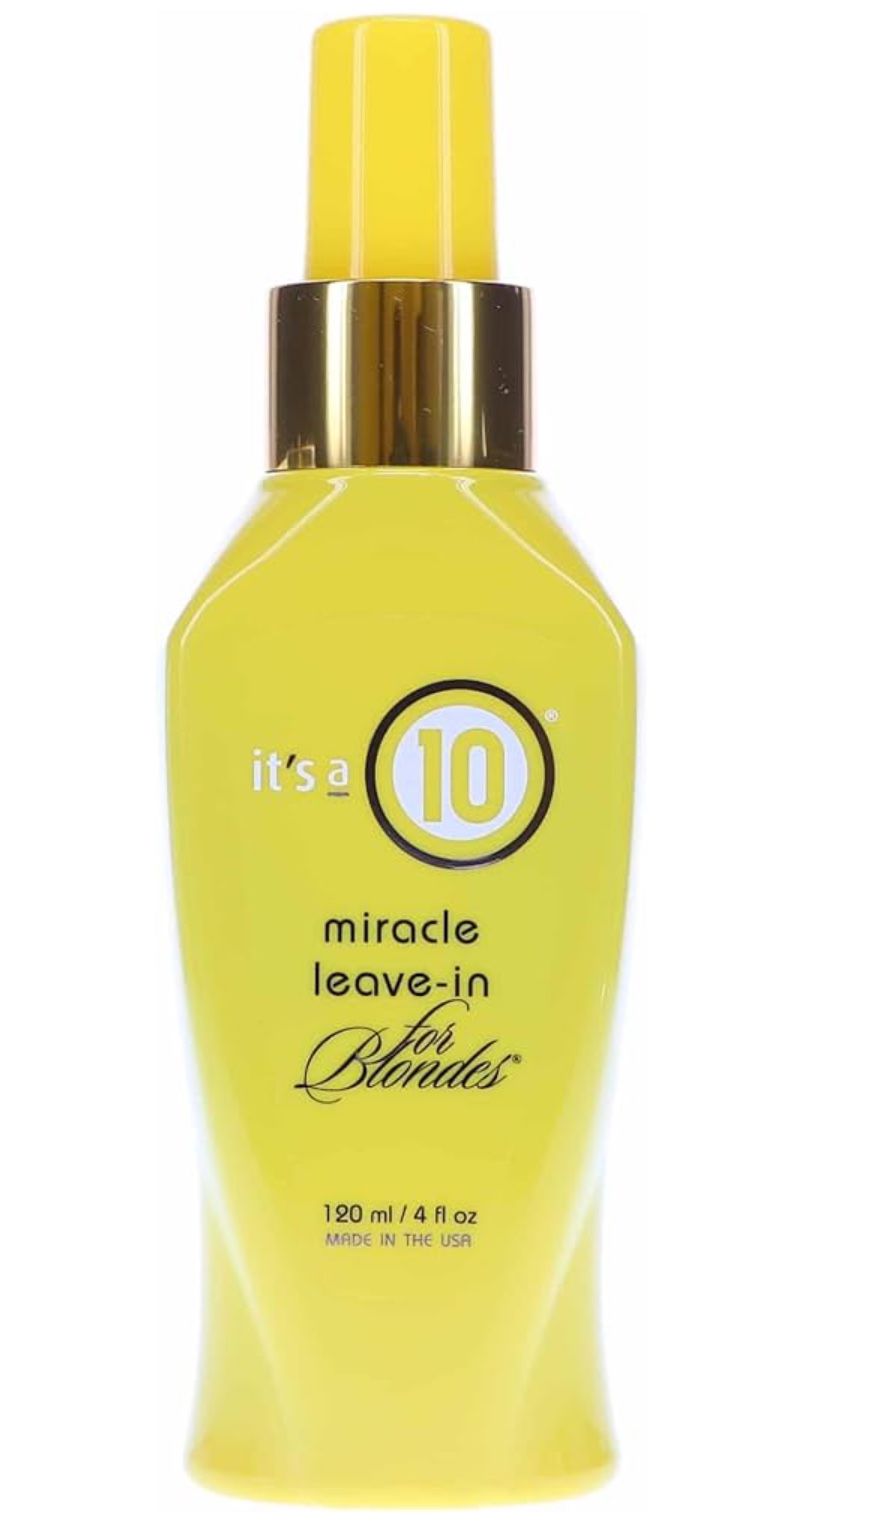   It's a 10 Haircare Miracle Leave-In for Blondes, 4 FL OZ X 2 *NEW*